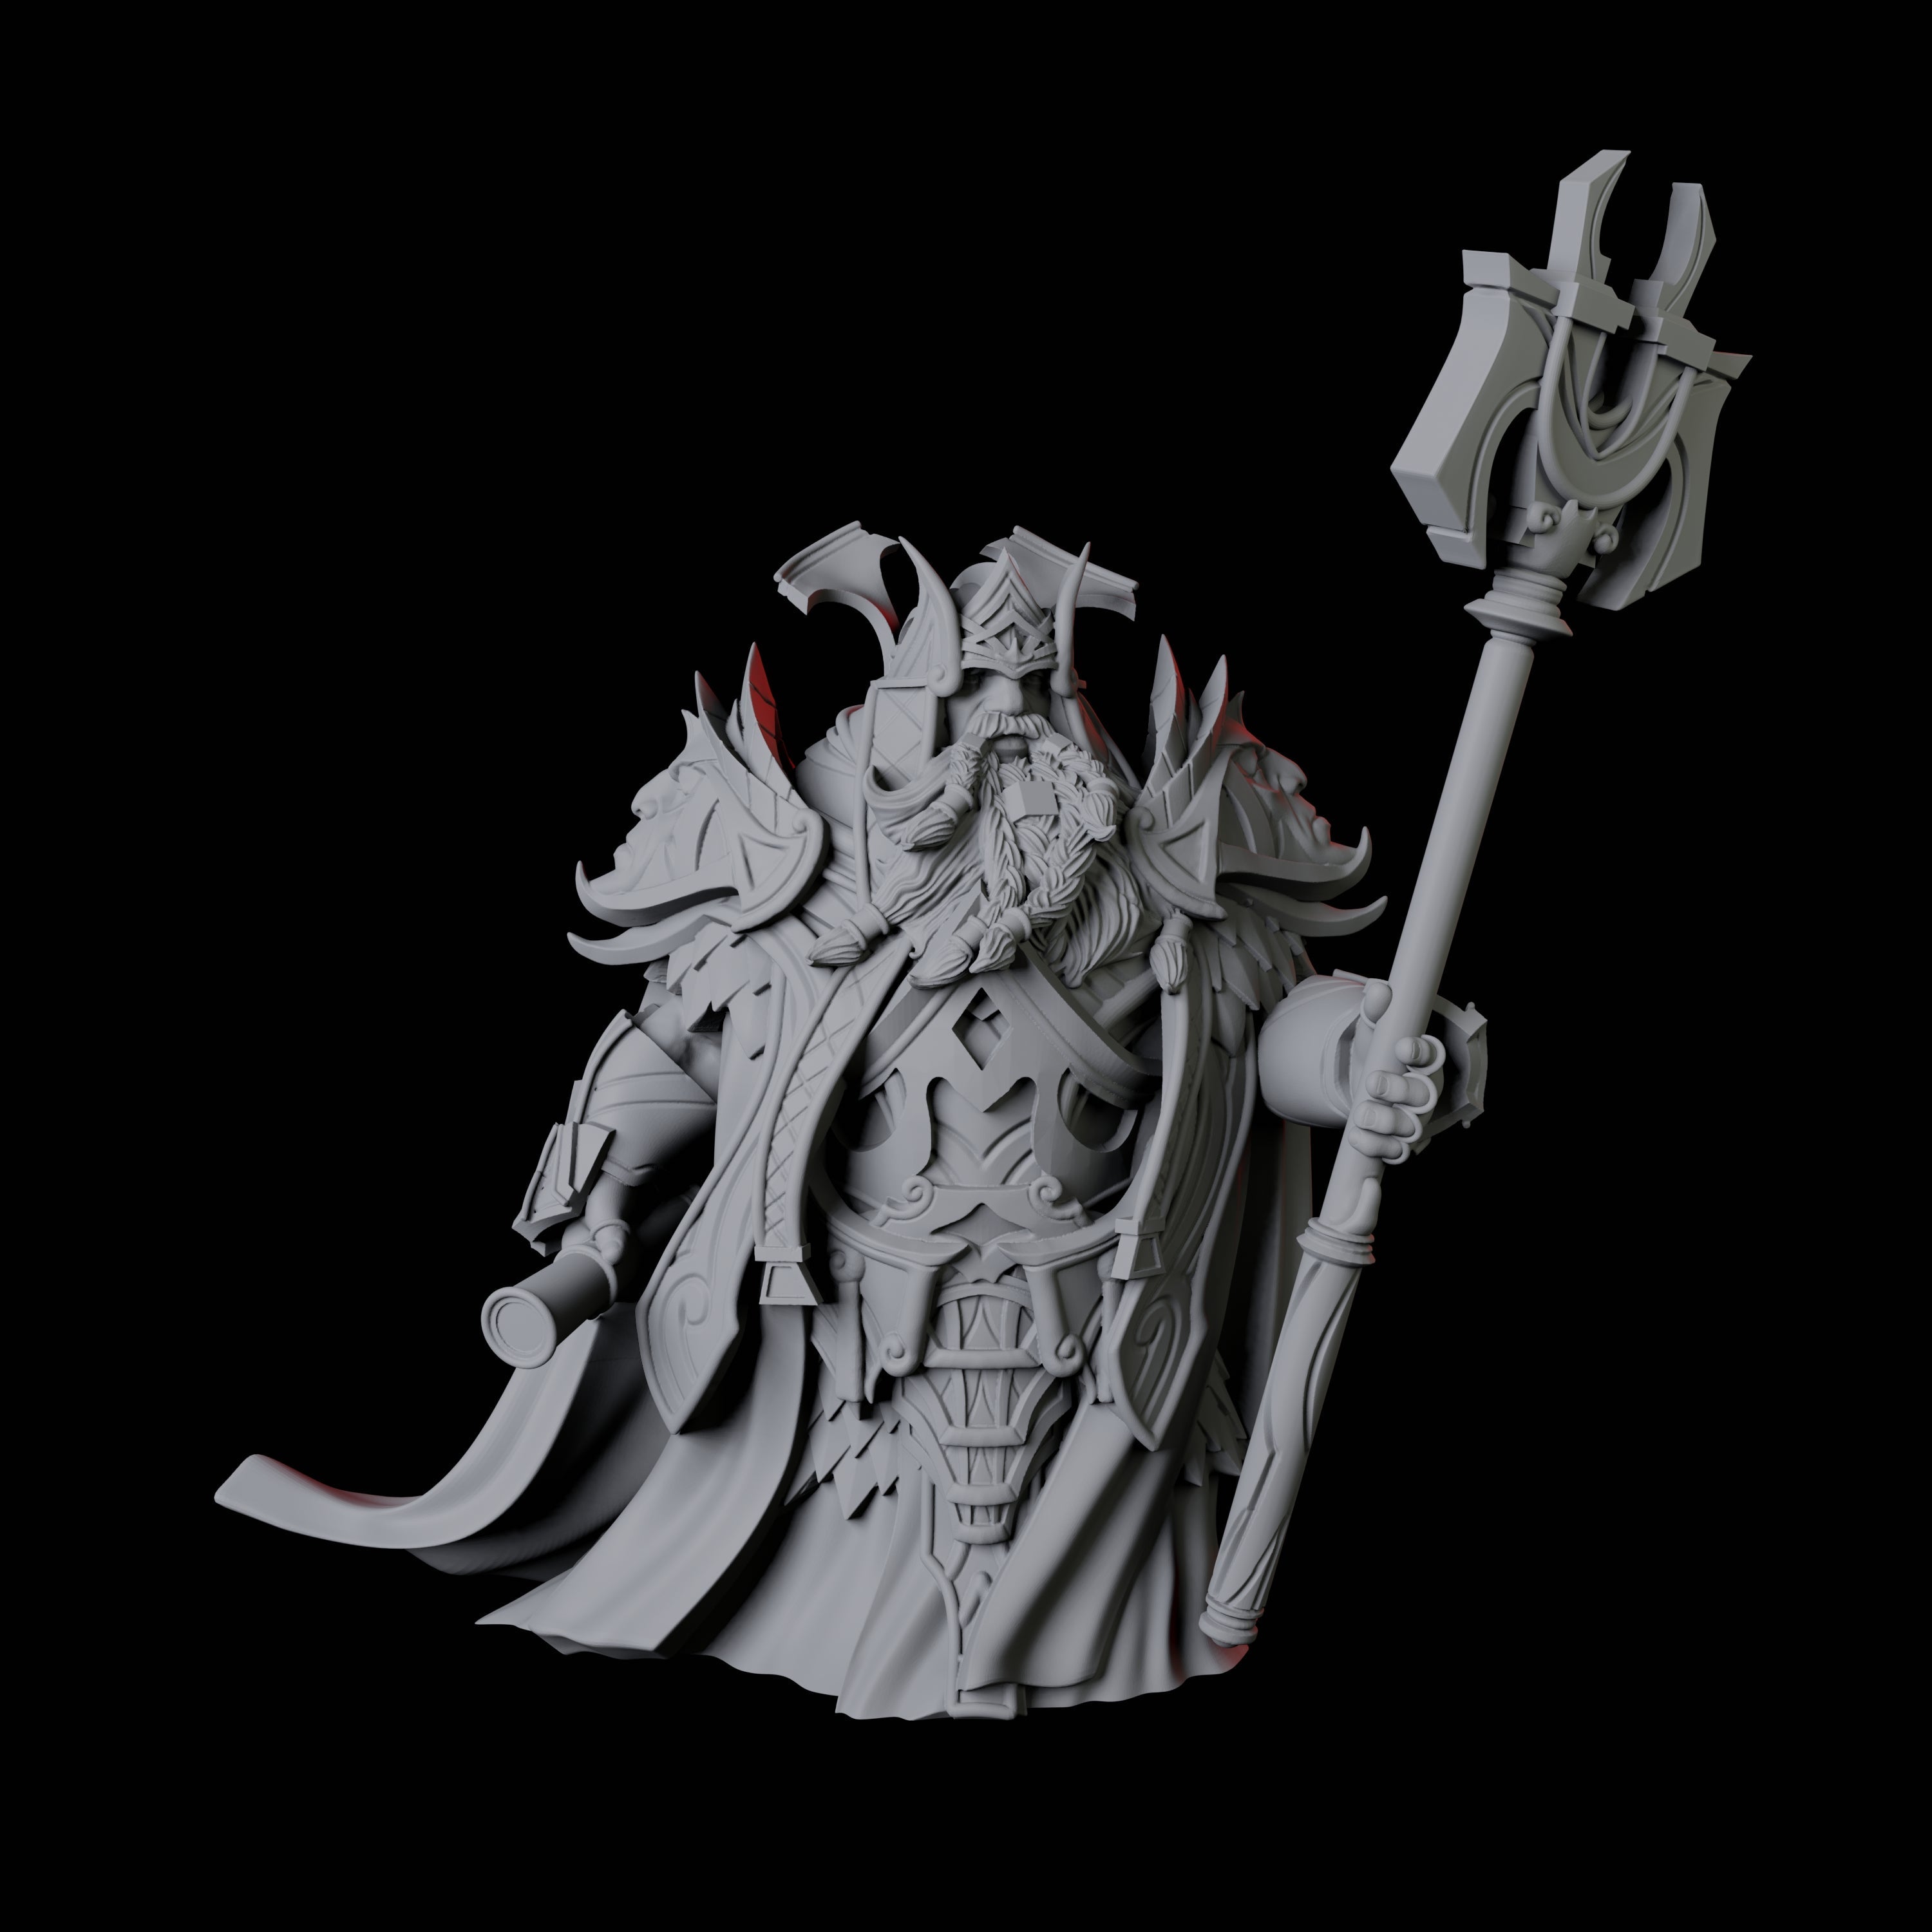 Dwarf High King Miniature for Dungeons and Dragons, Pathfinder or other TTRPGs